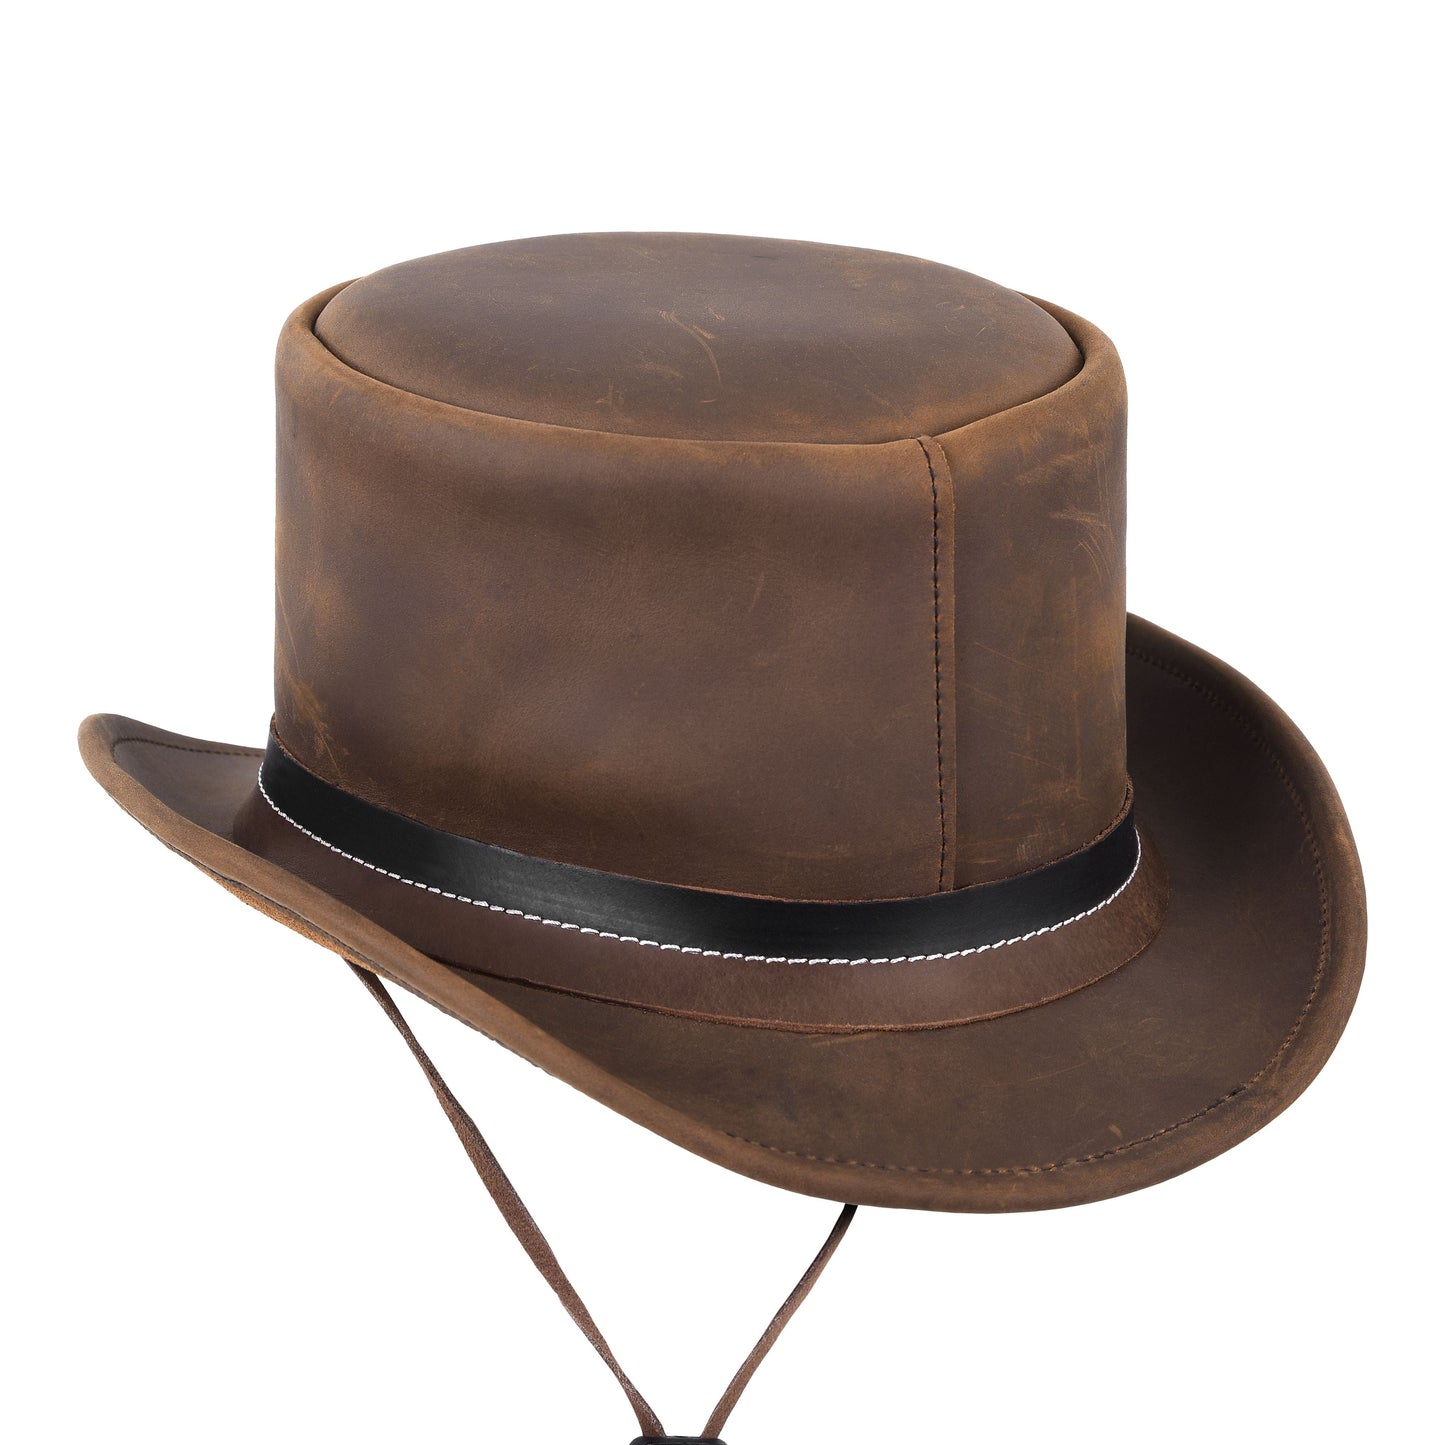 Vintage Leather Cowboy Hat with Star Hatband Brown Top Hat